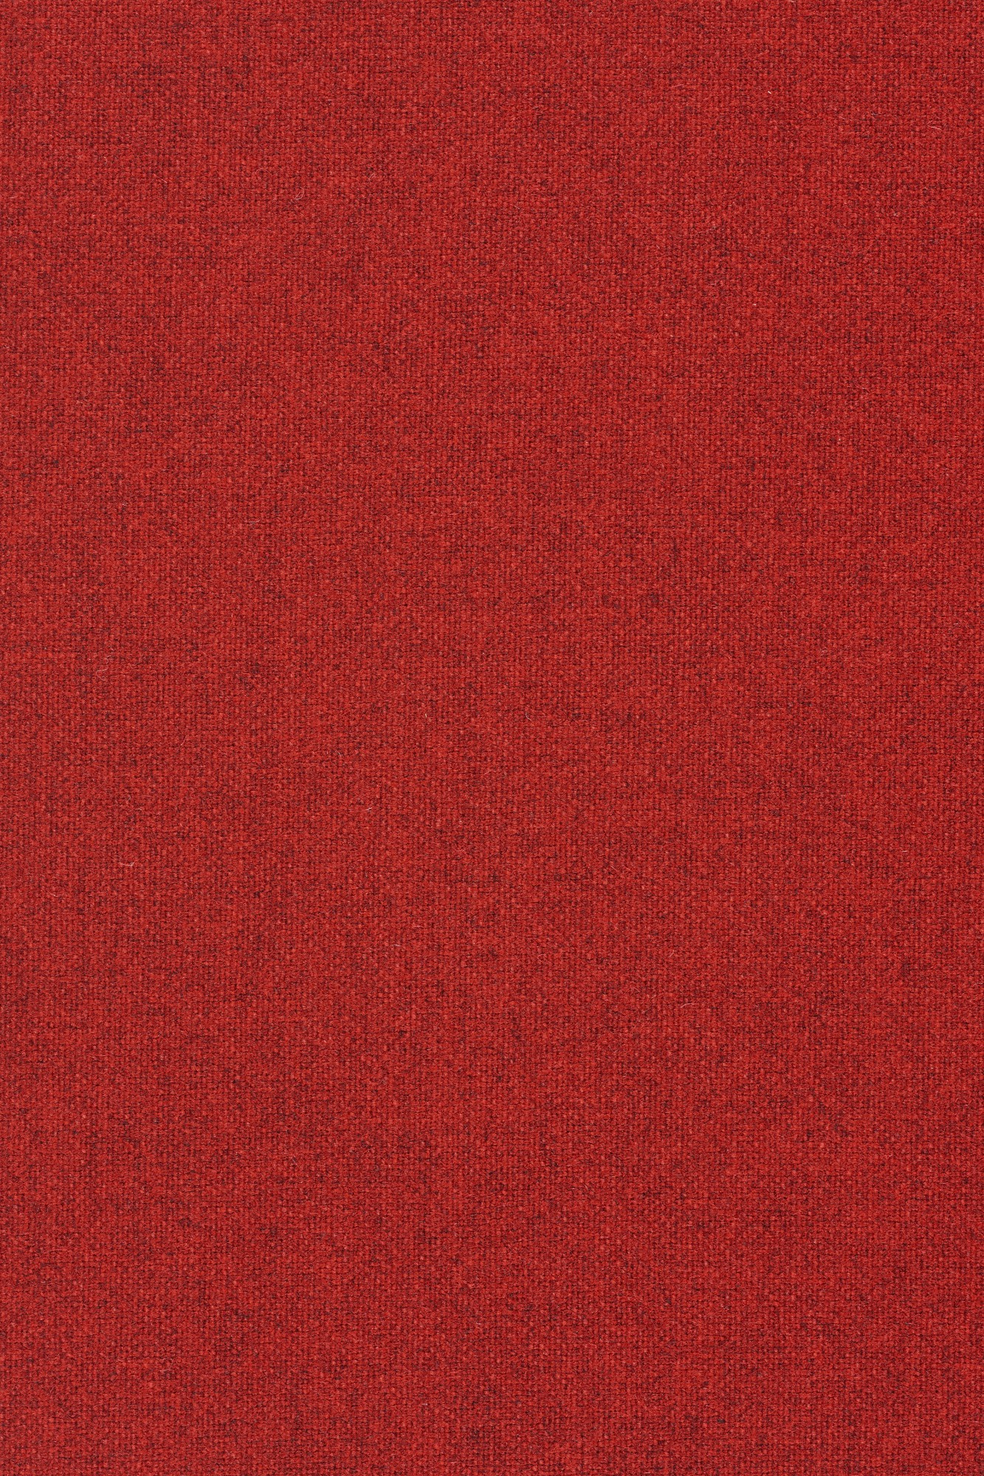 Fabric sample Tonica 2 611 red